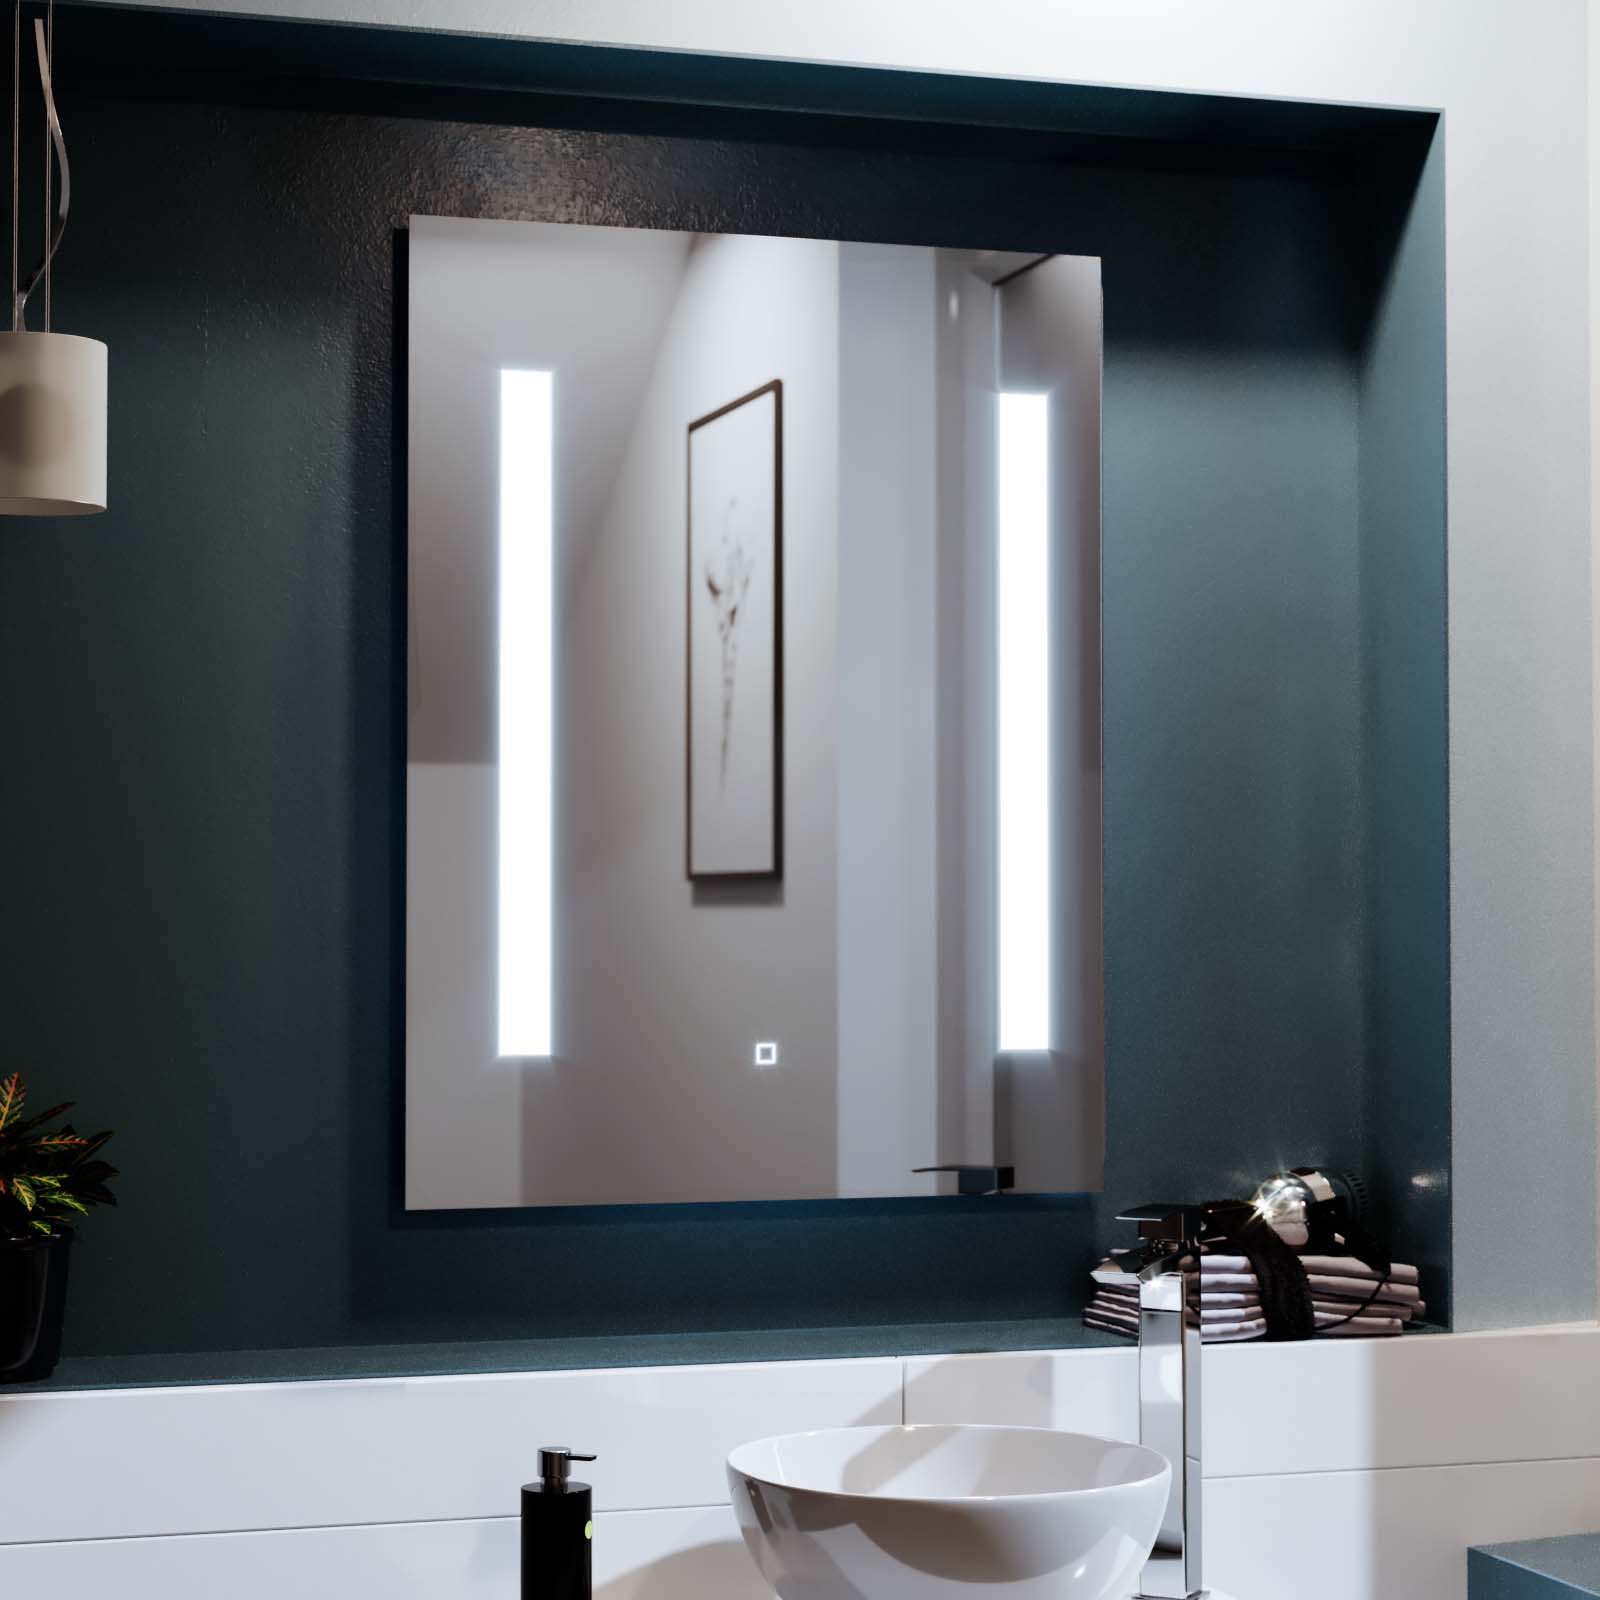 Large 600x800 mm Illuminated LED Bathroom Mirror with Anti Fog and Touch Switch